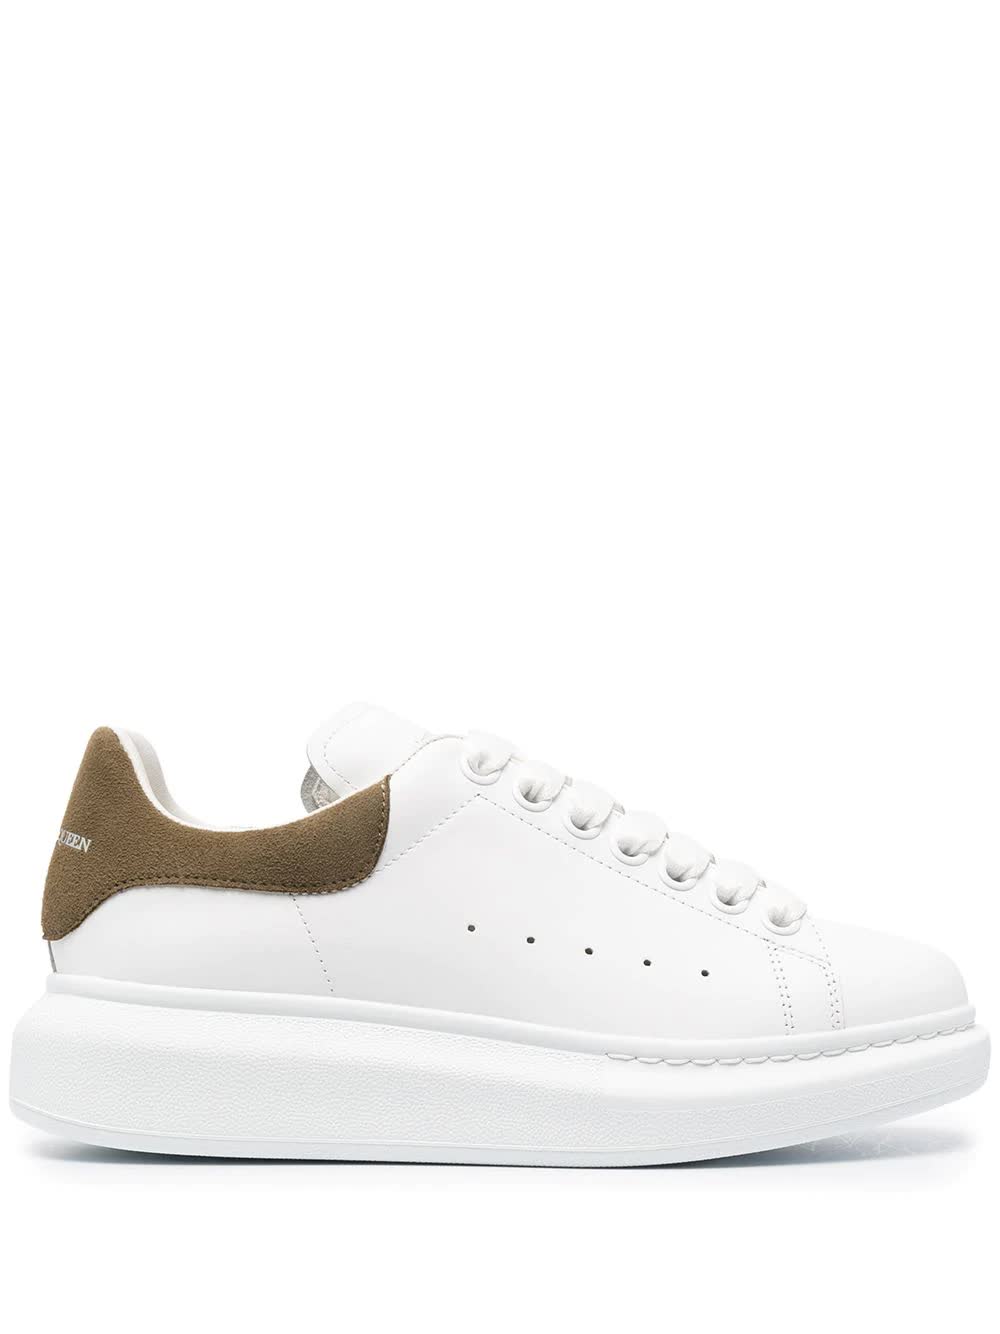 Buy Alexander McQueen Woman White And Khaki Green Oversize Sneakers online, shop Alexander McQueen shoes with free shipping